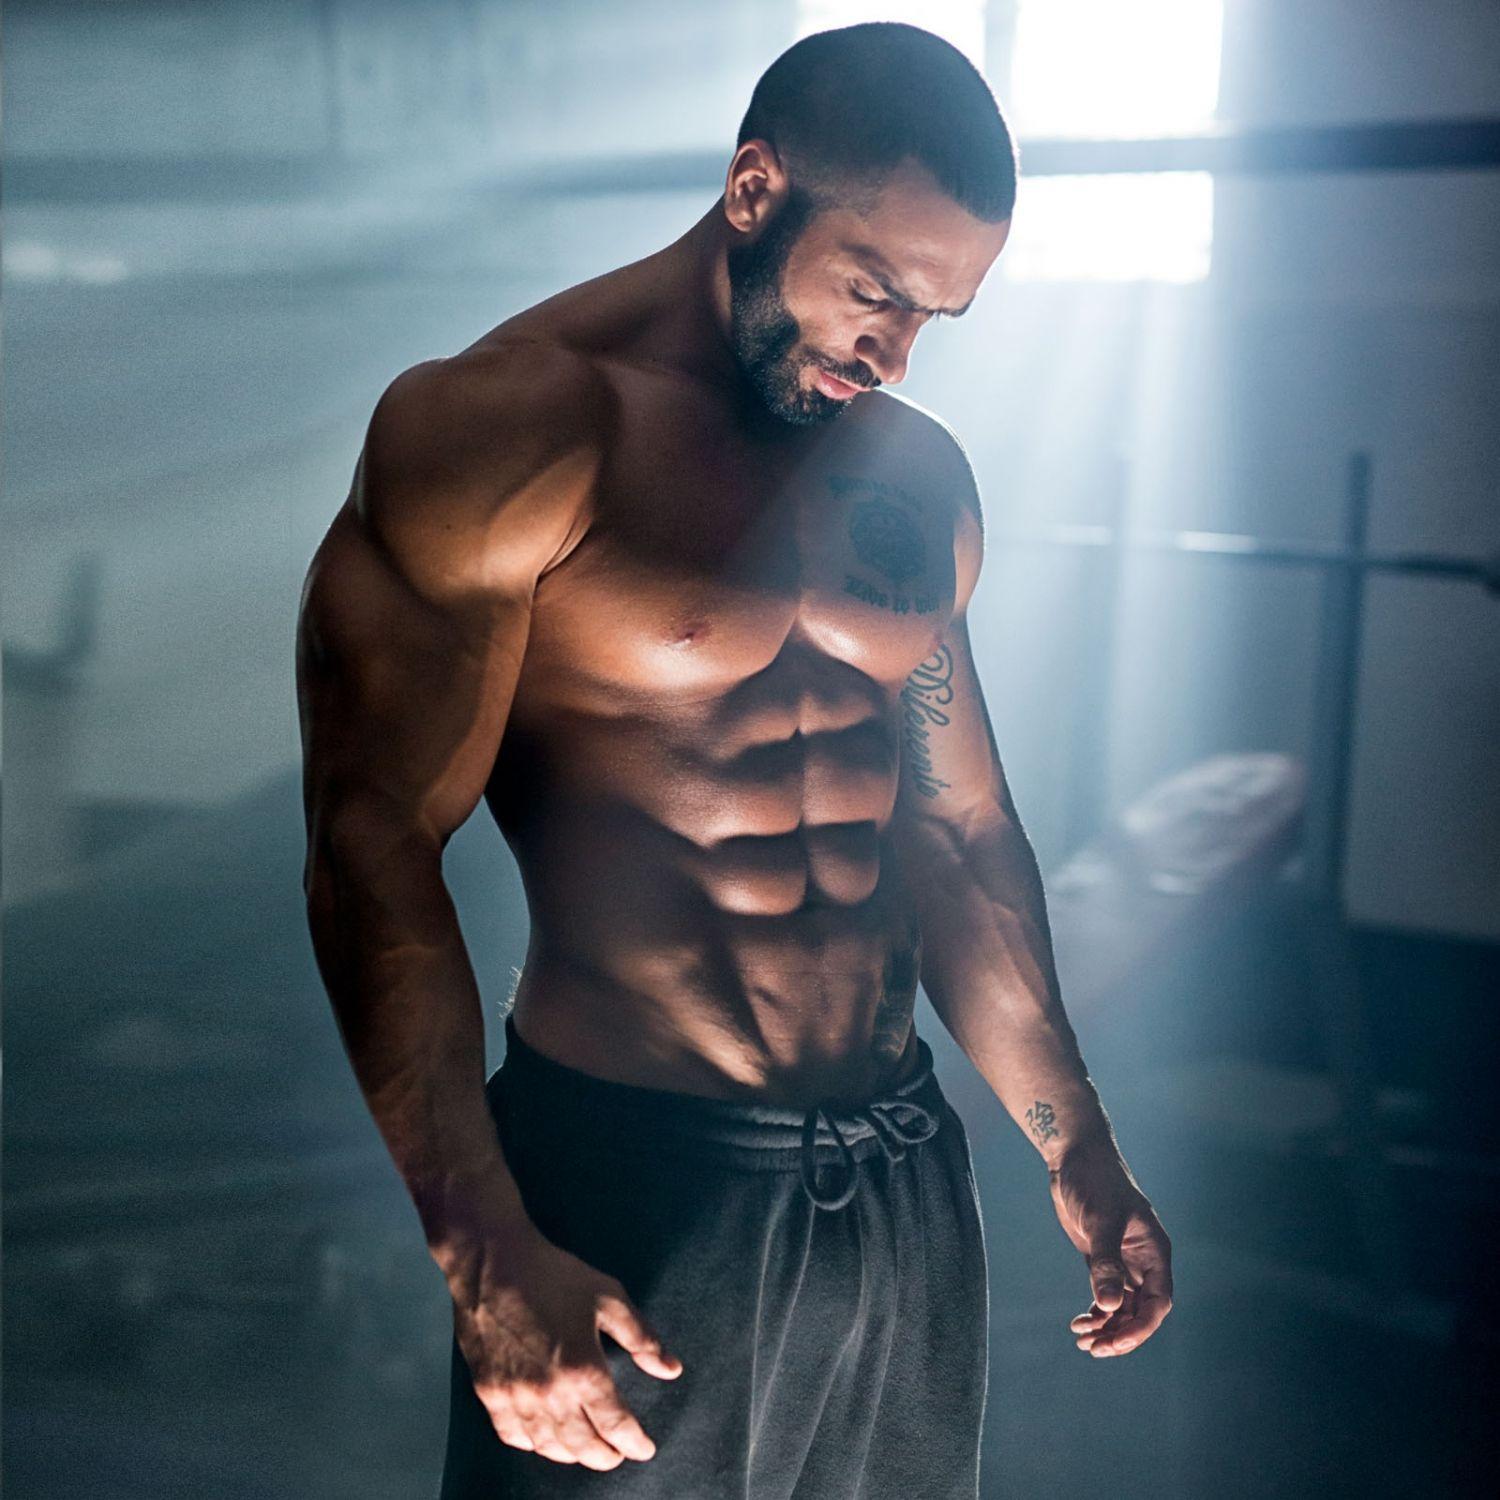 Amazon.com: makeuseof Lazar Angelov Fitness Center Art Silk Poster Bedroom  Wall Decor Can Choose Size 24x36inch: Posters & Prints